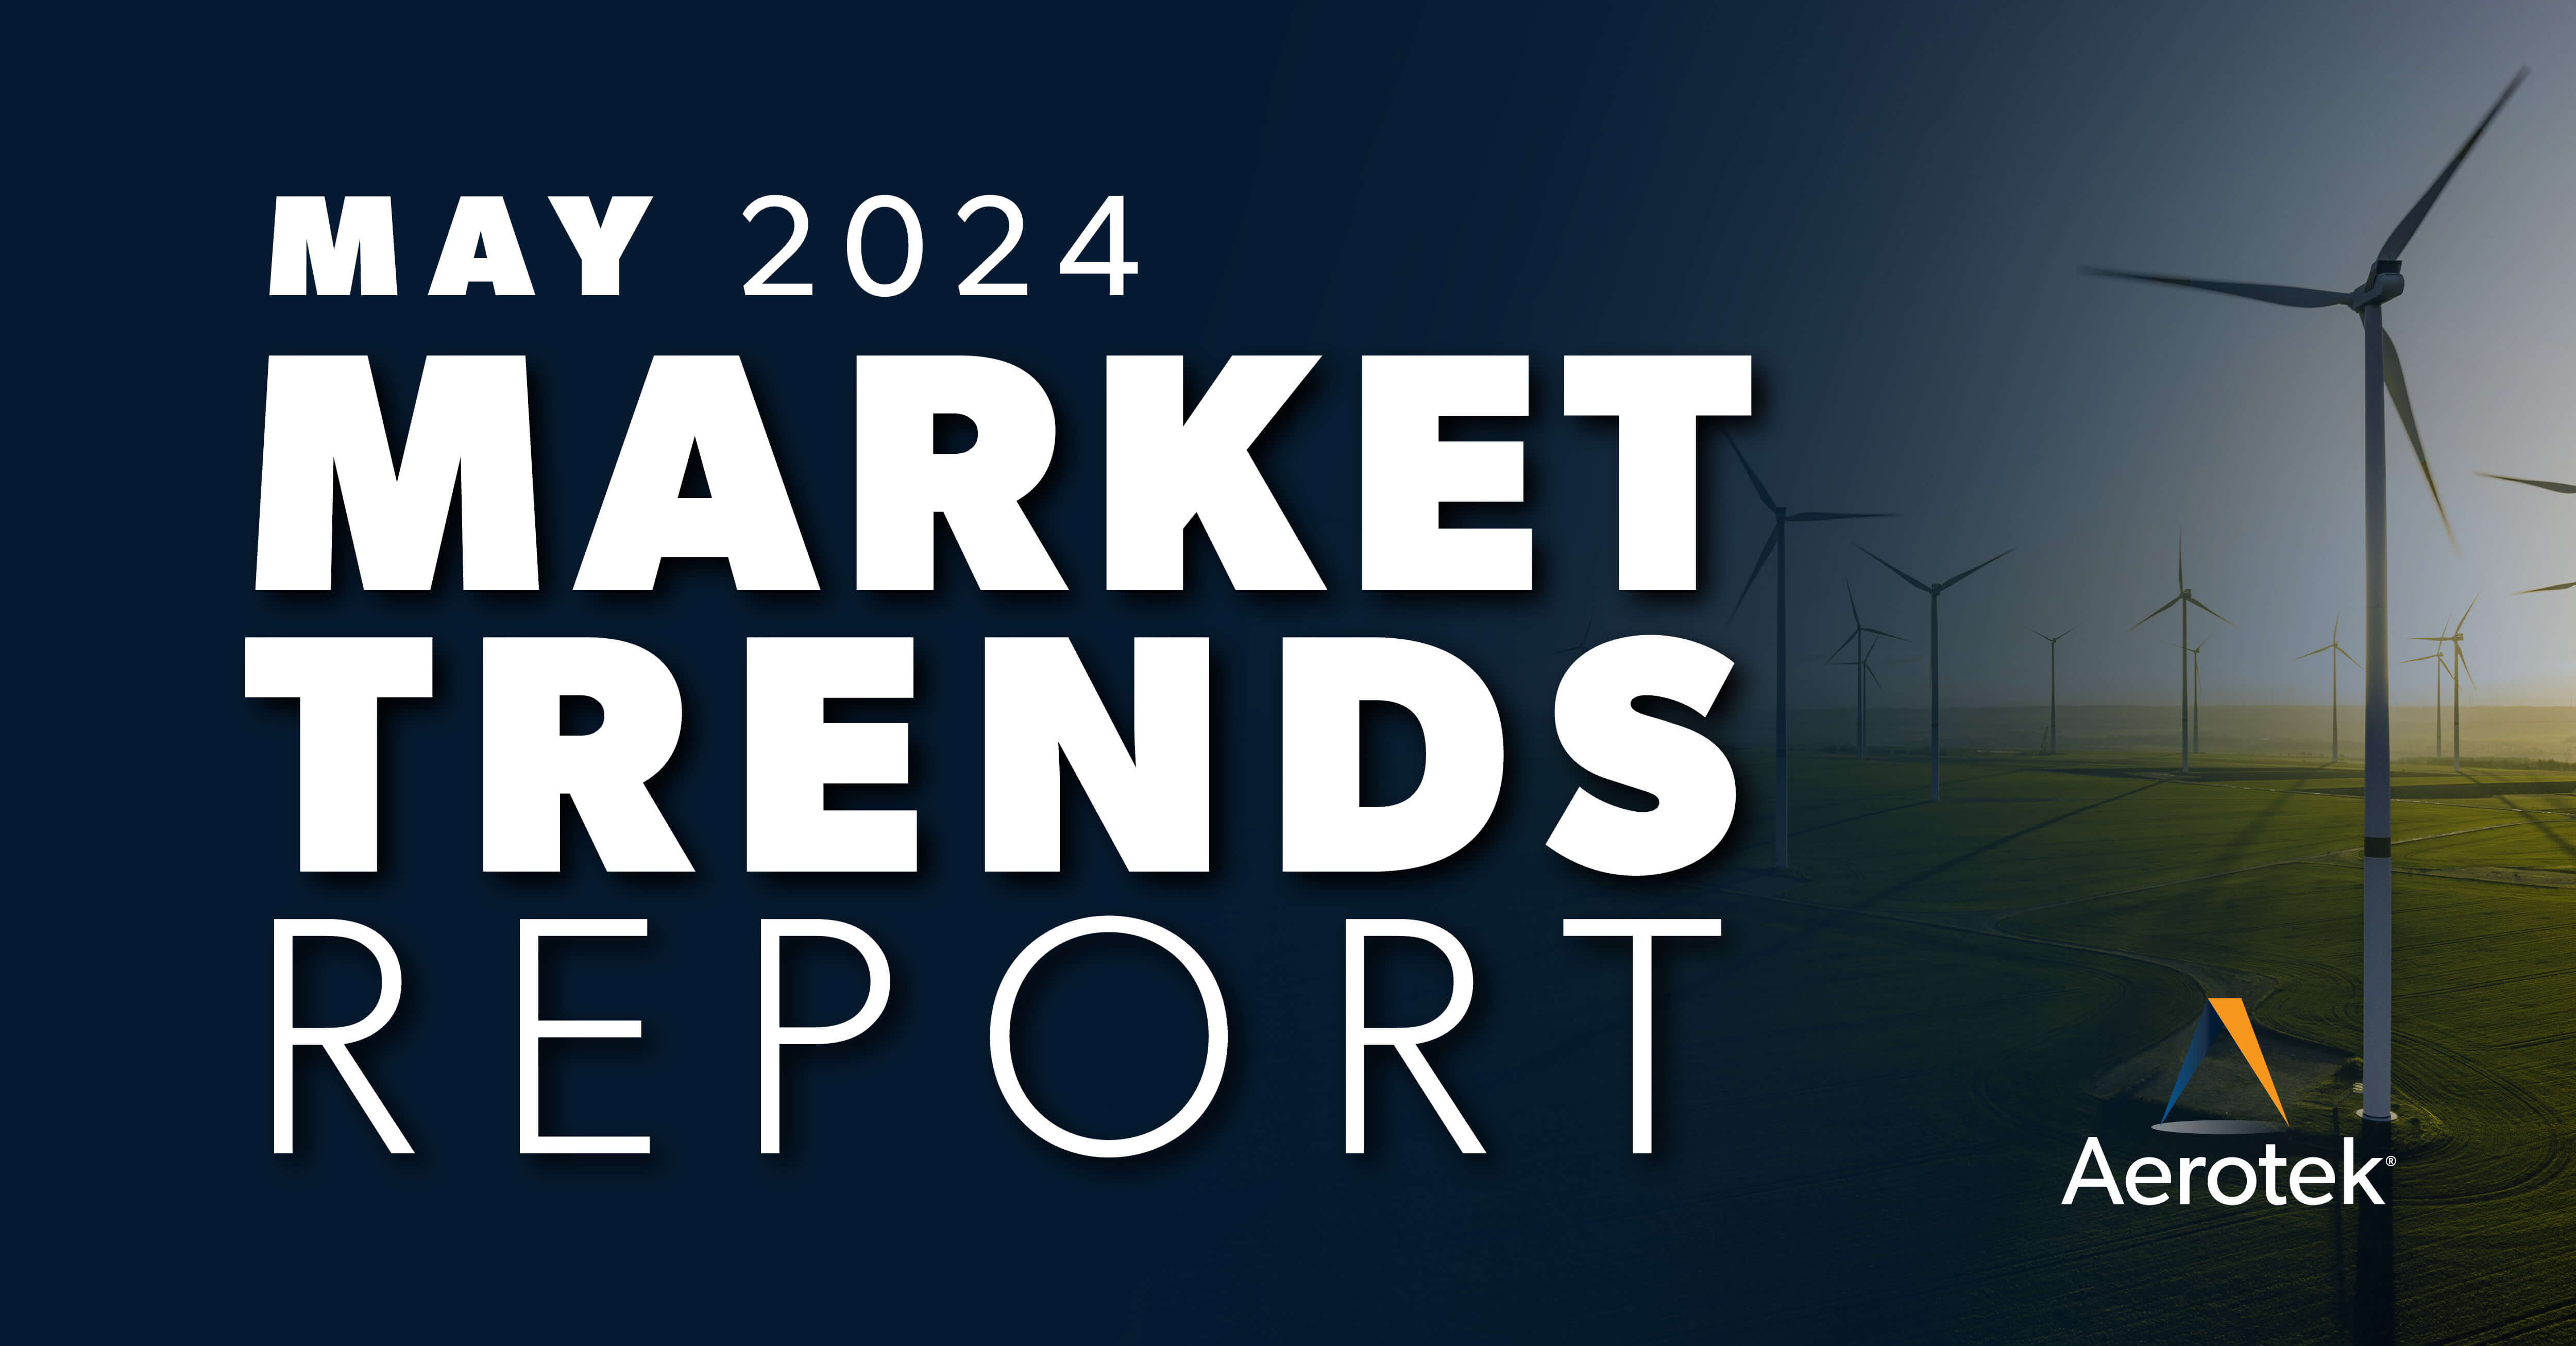 A caption reads "May 2024 Market Trends Report" over a background of wind turbines in a field